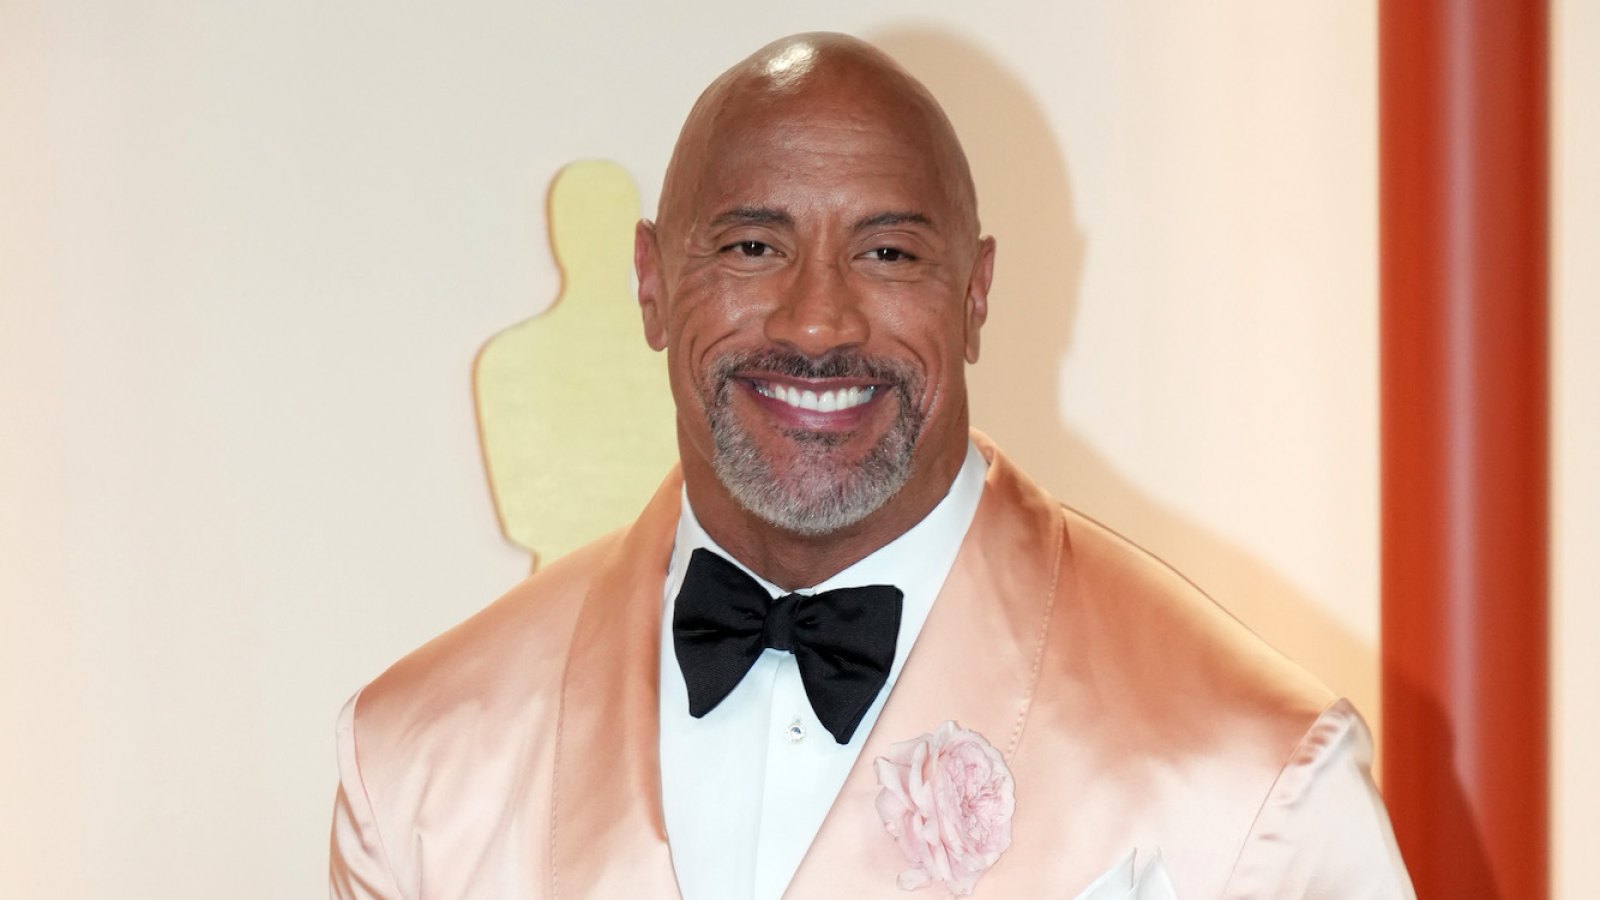 Dwayne 'The Rock' Johnson: I was asked to run for US president by multiple  political parties, Dwayne Johnson (The Rock)